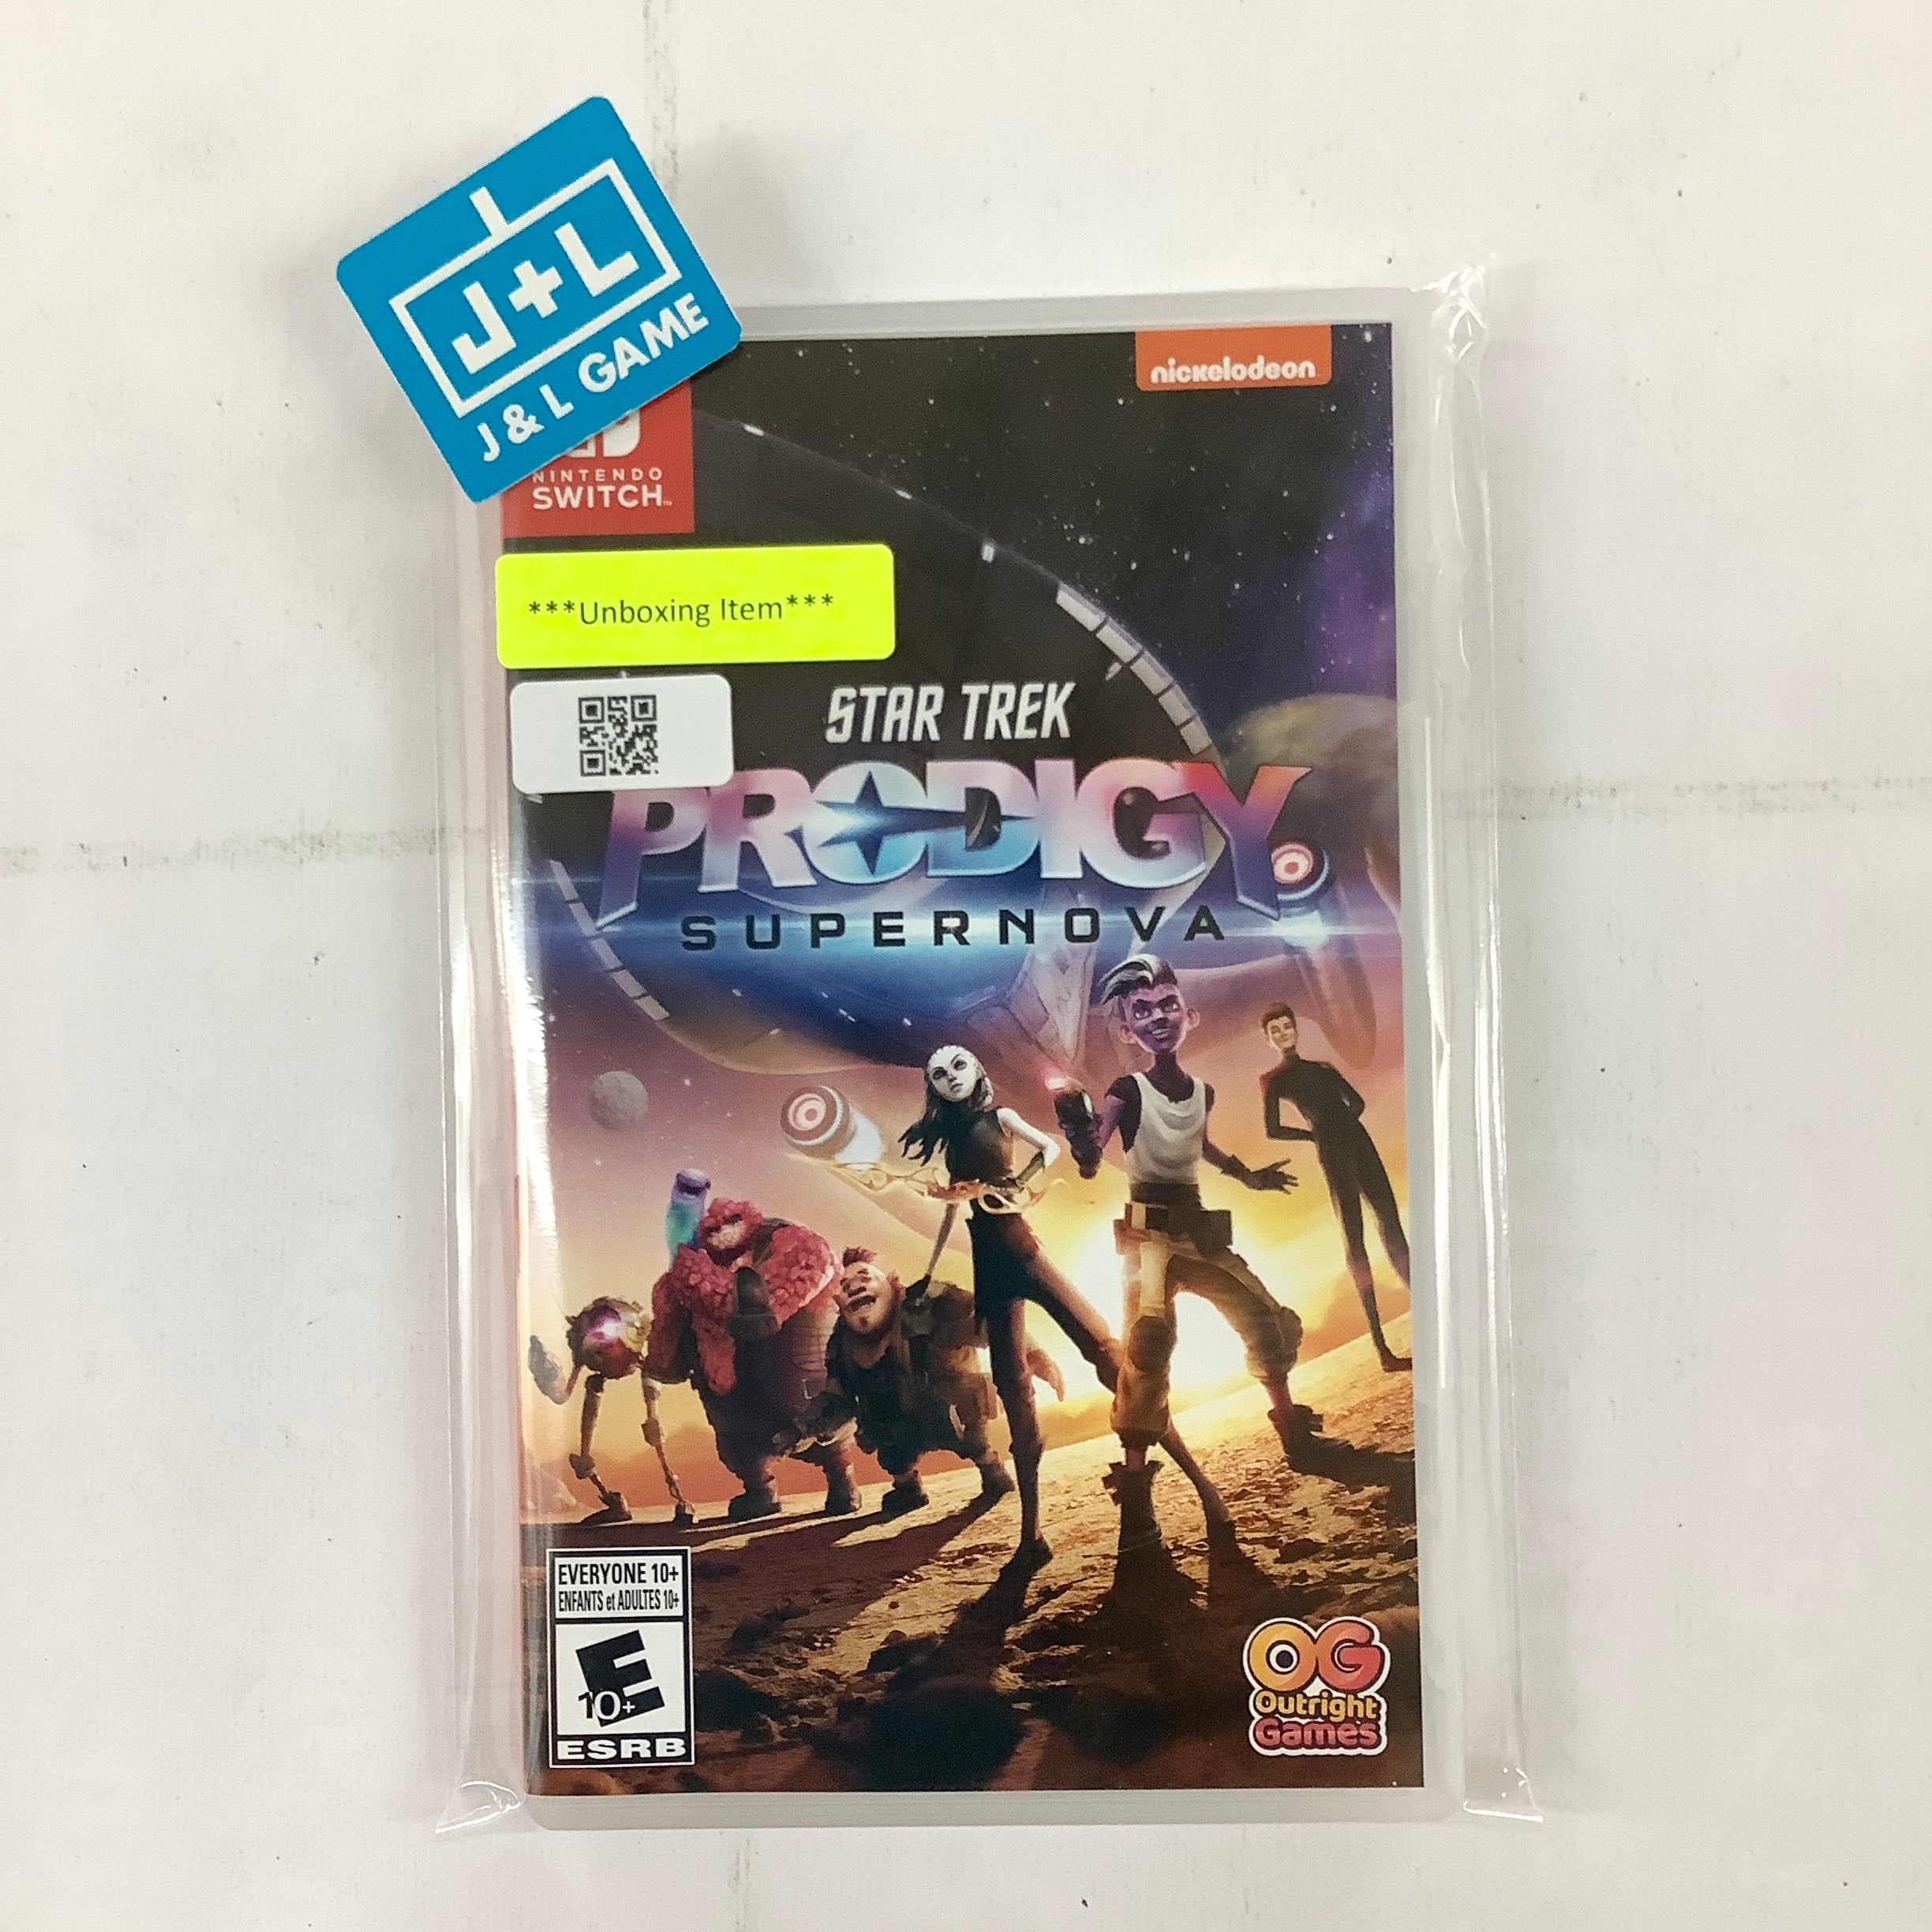 Star Trek Prodigy: Supernova - (NSW) Nintendo Switch [UNBOXING] Video Games Outright Games   